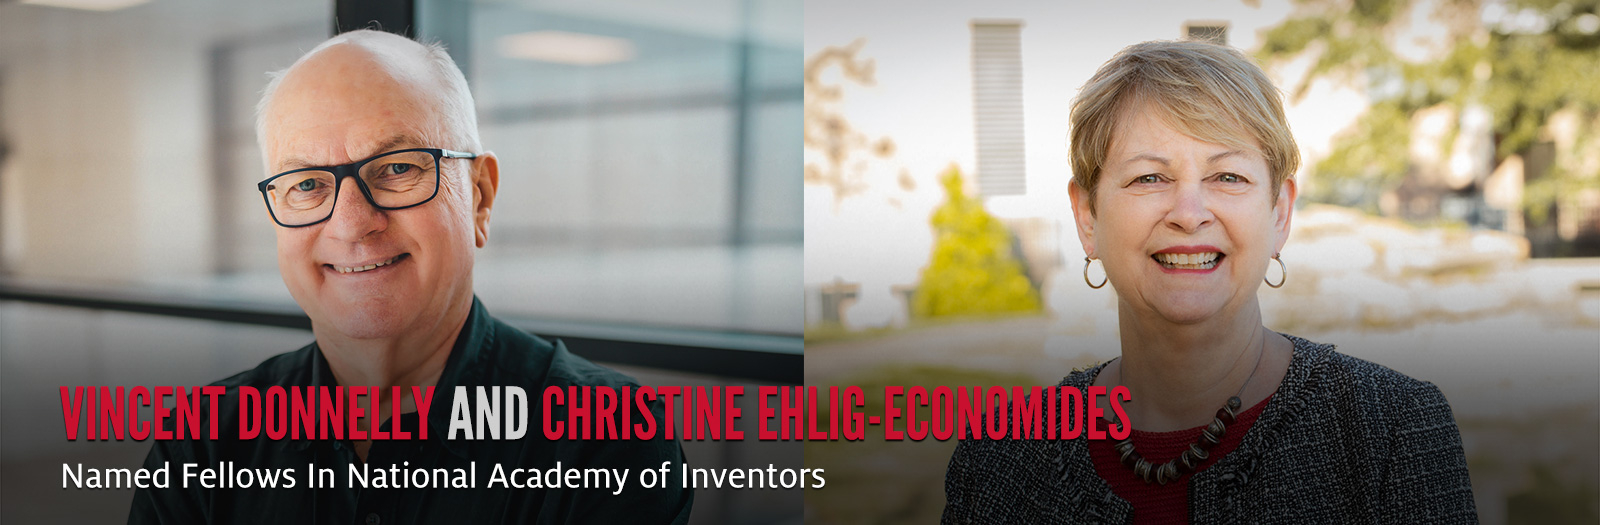 Vincent Donnelly and Christine Ehlig-Economides Named Fellows In National Academy of Inventors